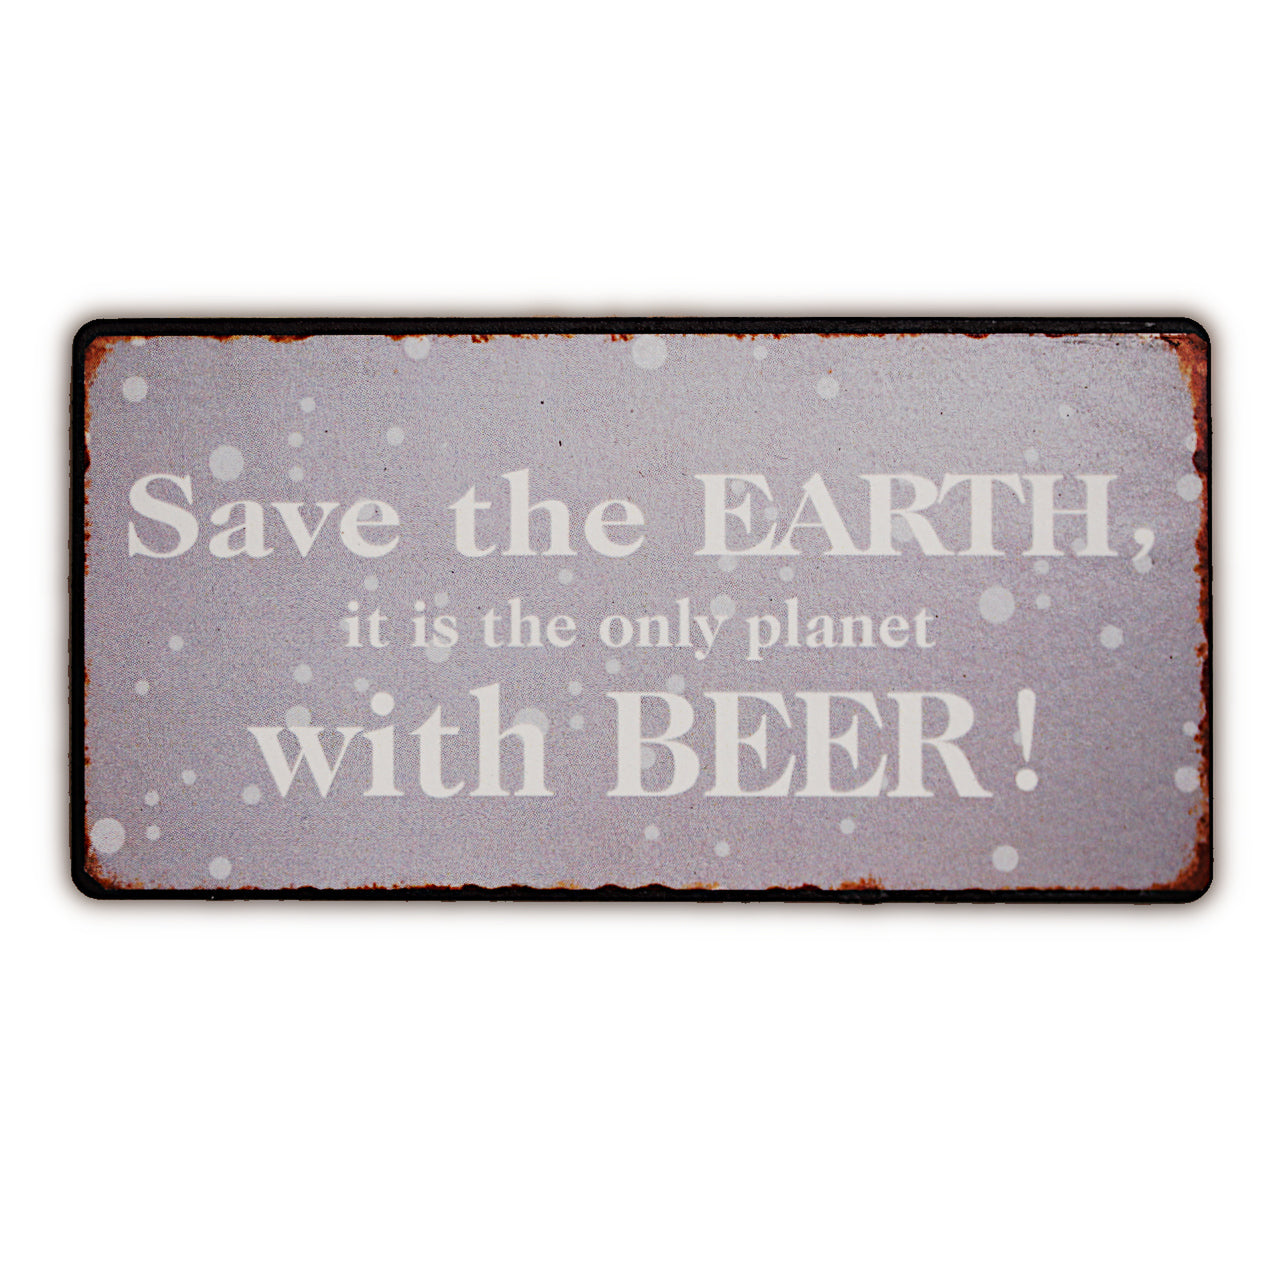 Magnet: Save the earth. It is the only planet with beer!